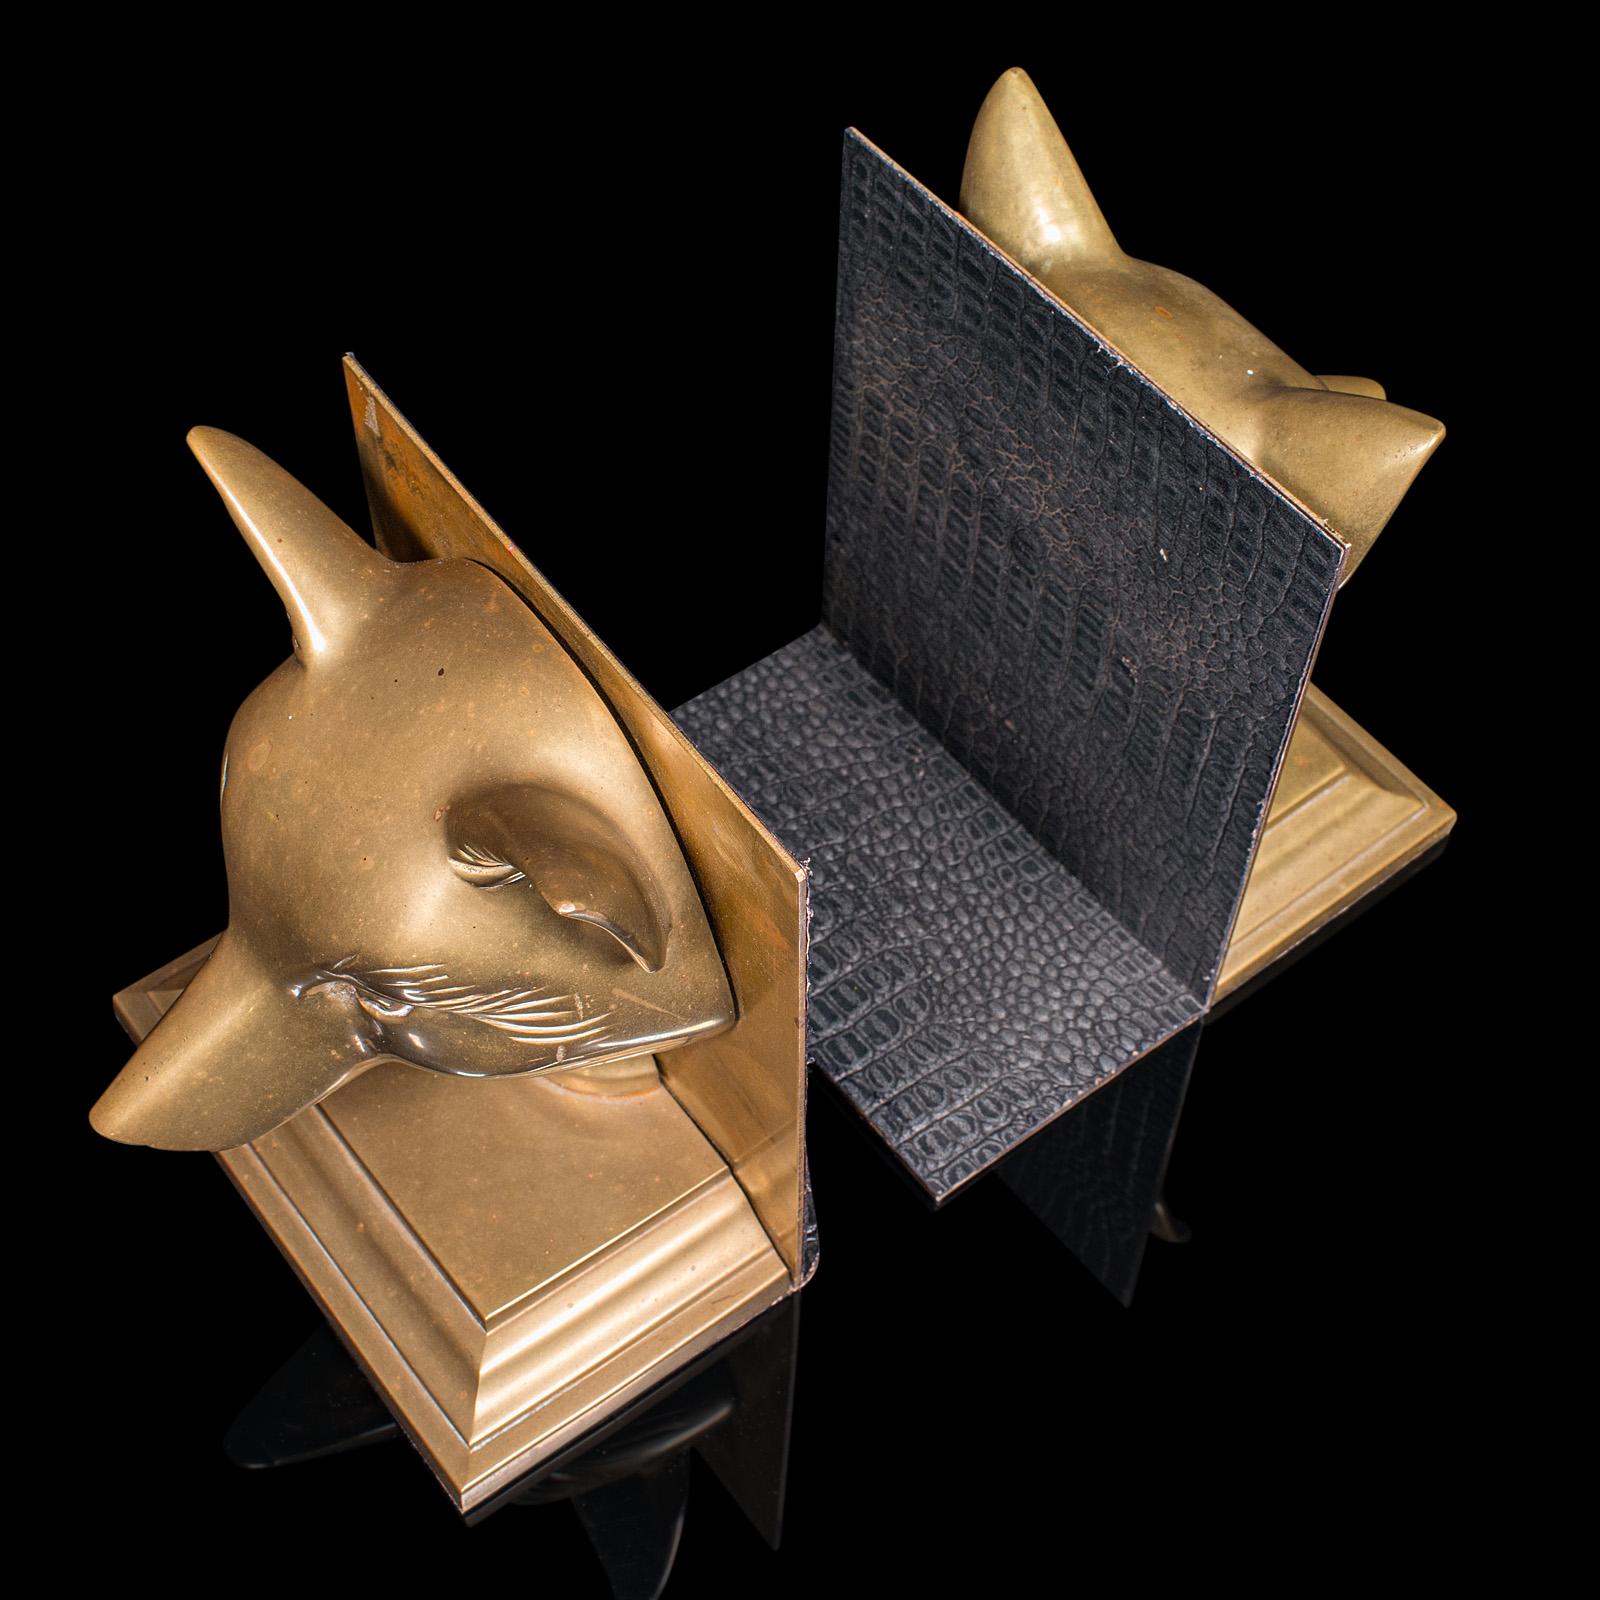 Pair Of Antique Fox Bookends, English, Brass, Decorative, Book Rest, Victorian In Good Condition For Sale In Hele, Devon, GB